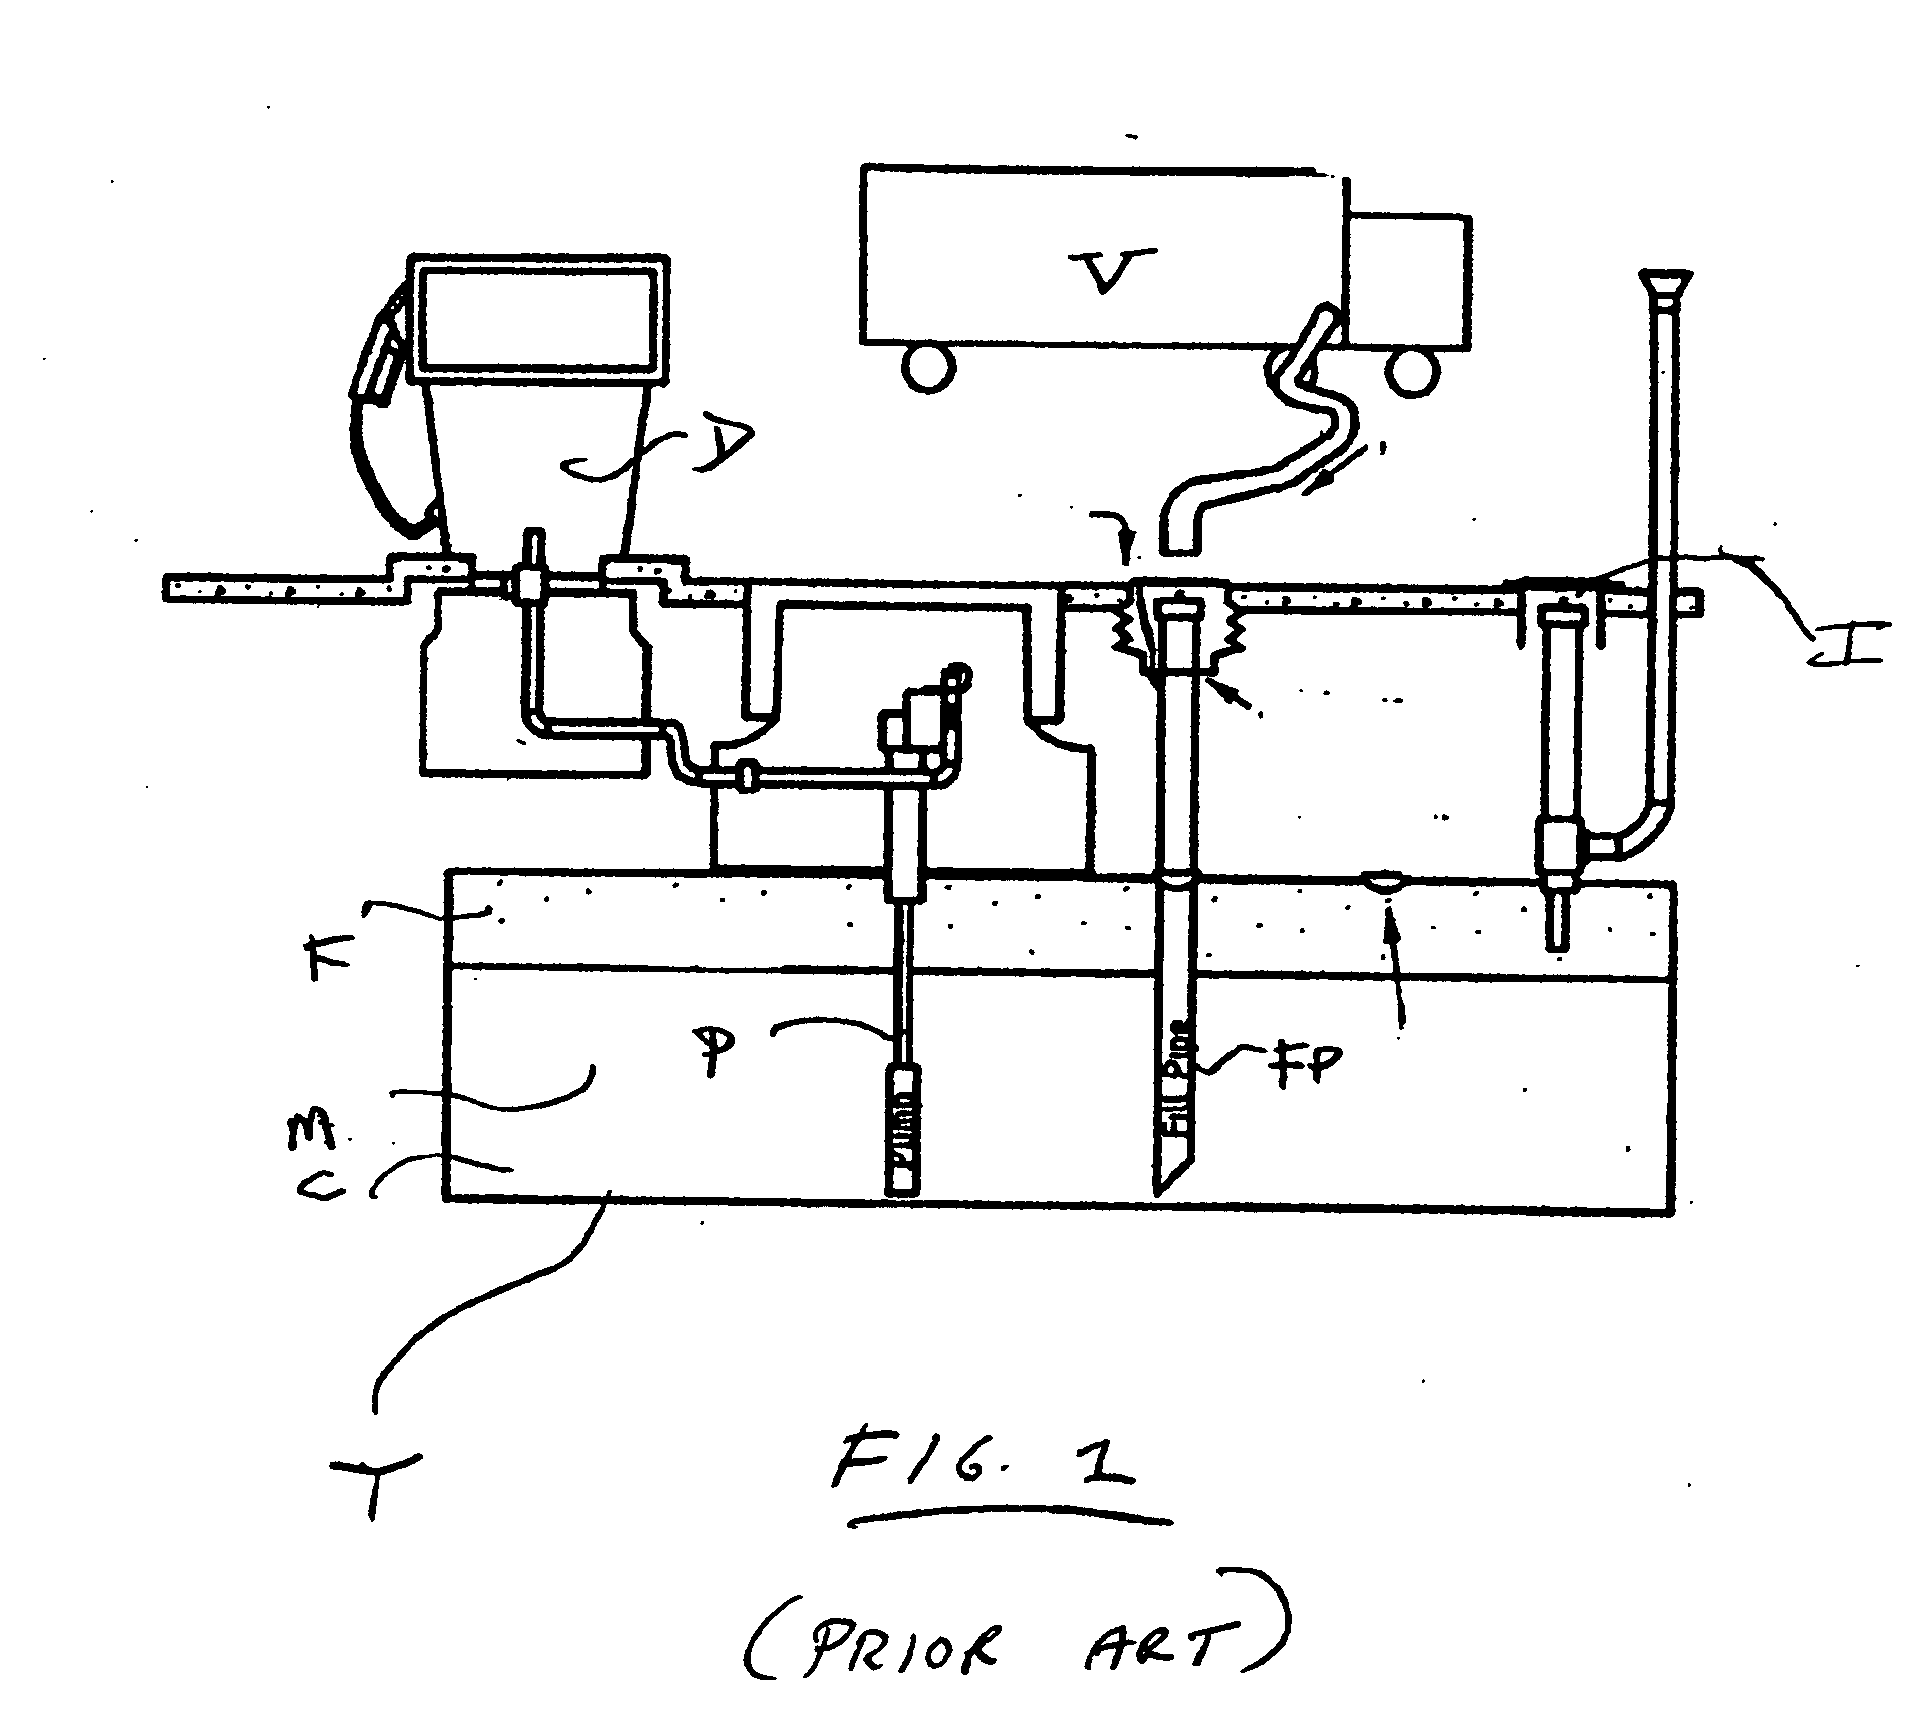 Apparatus and method for detecting and removing moisture and contaminants in a fuel storage tank